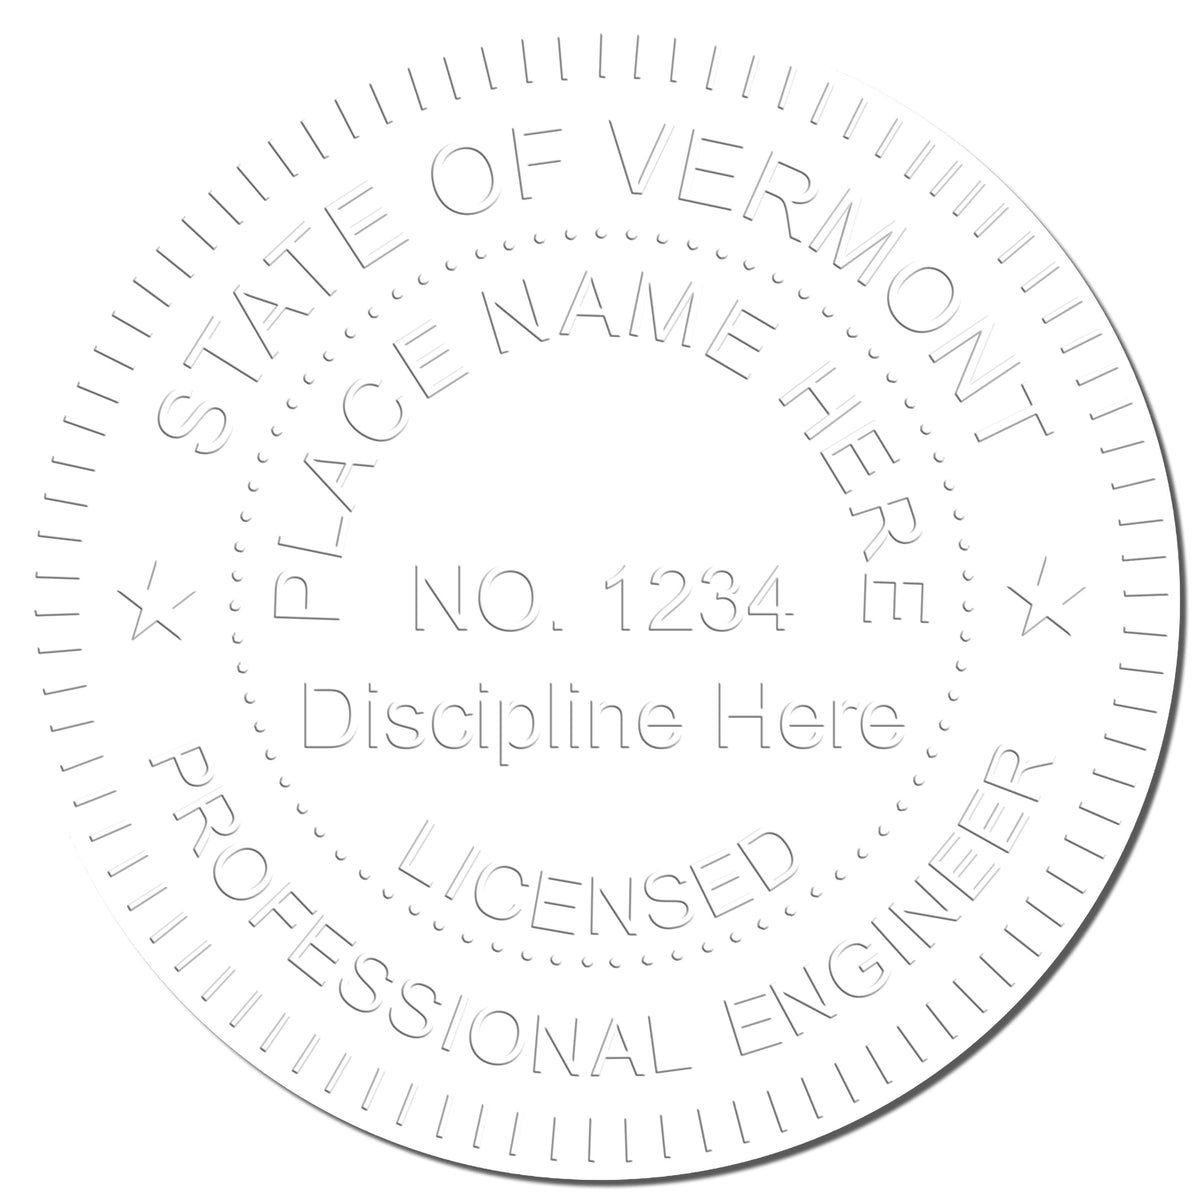 This paper is stamped with a sample imprint of the Hybrid Vermont Engineer Seal, signifying its quality and reliability.